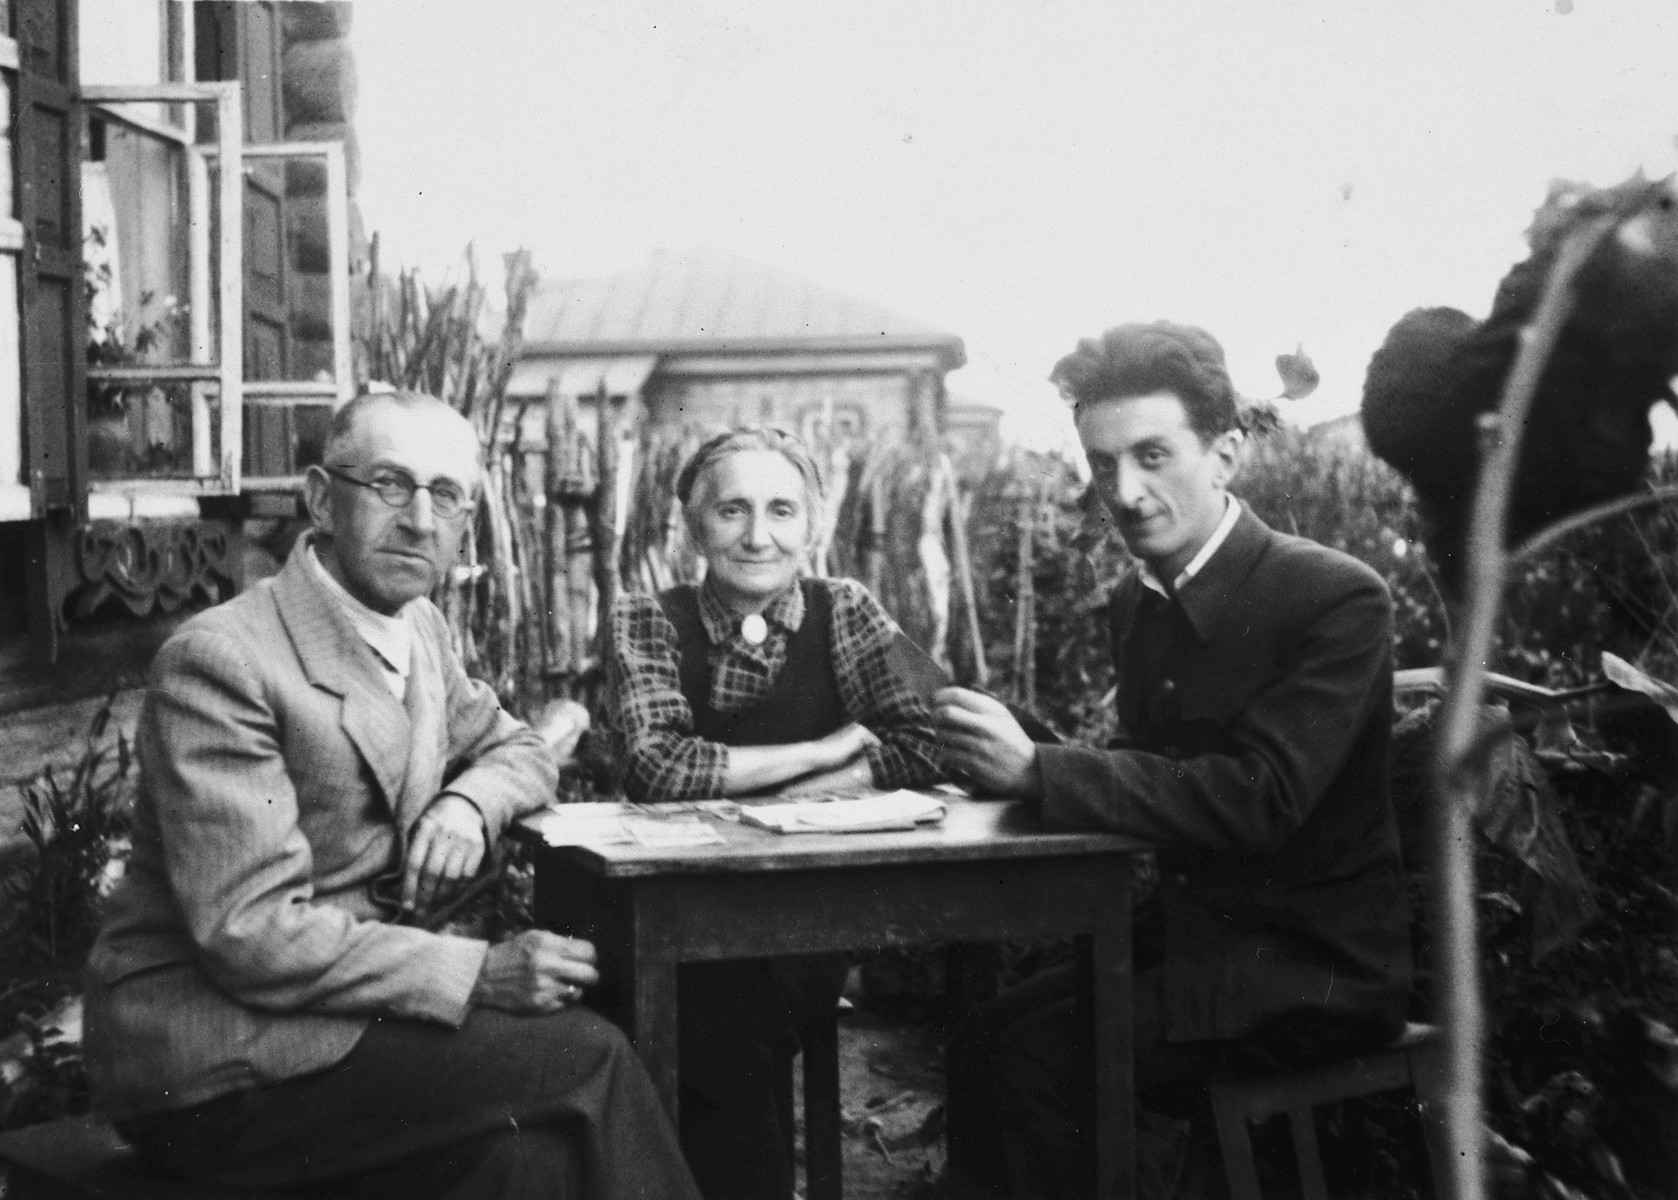 The Rafes family poses outside their home in the Ural Mountains where they were evacuated to during the war.

Pictured are Helena, Yulian and Itzhack Rafes.